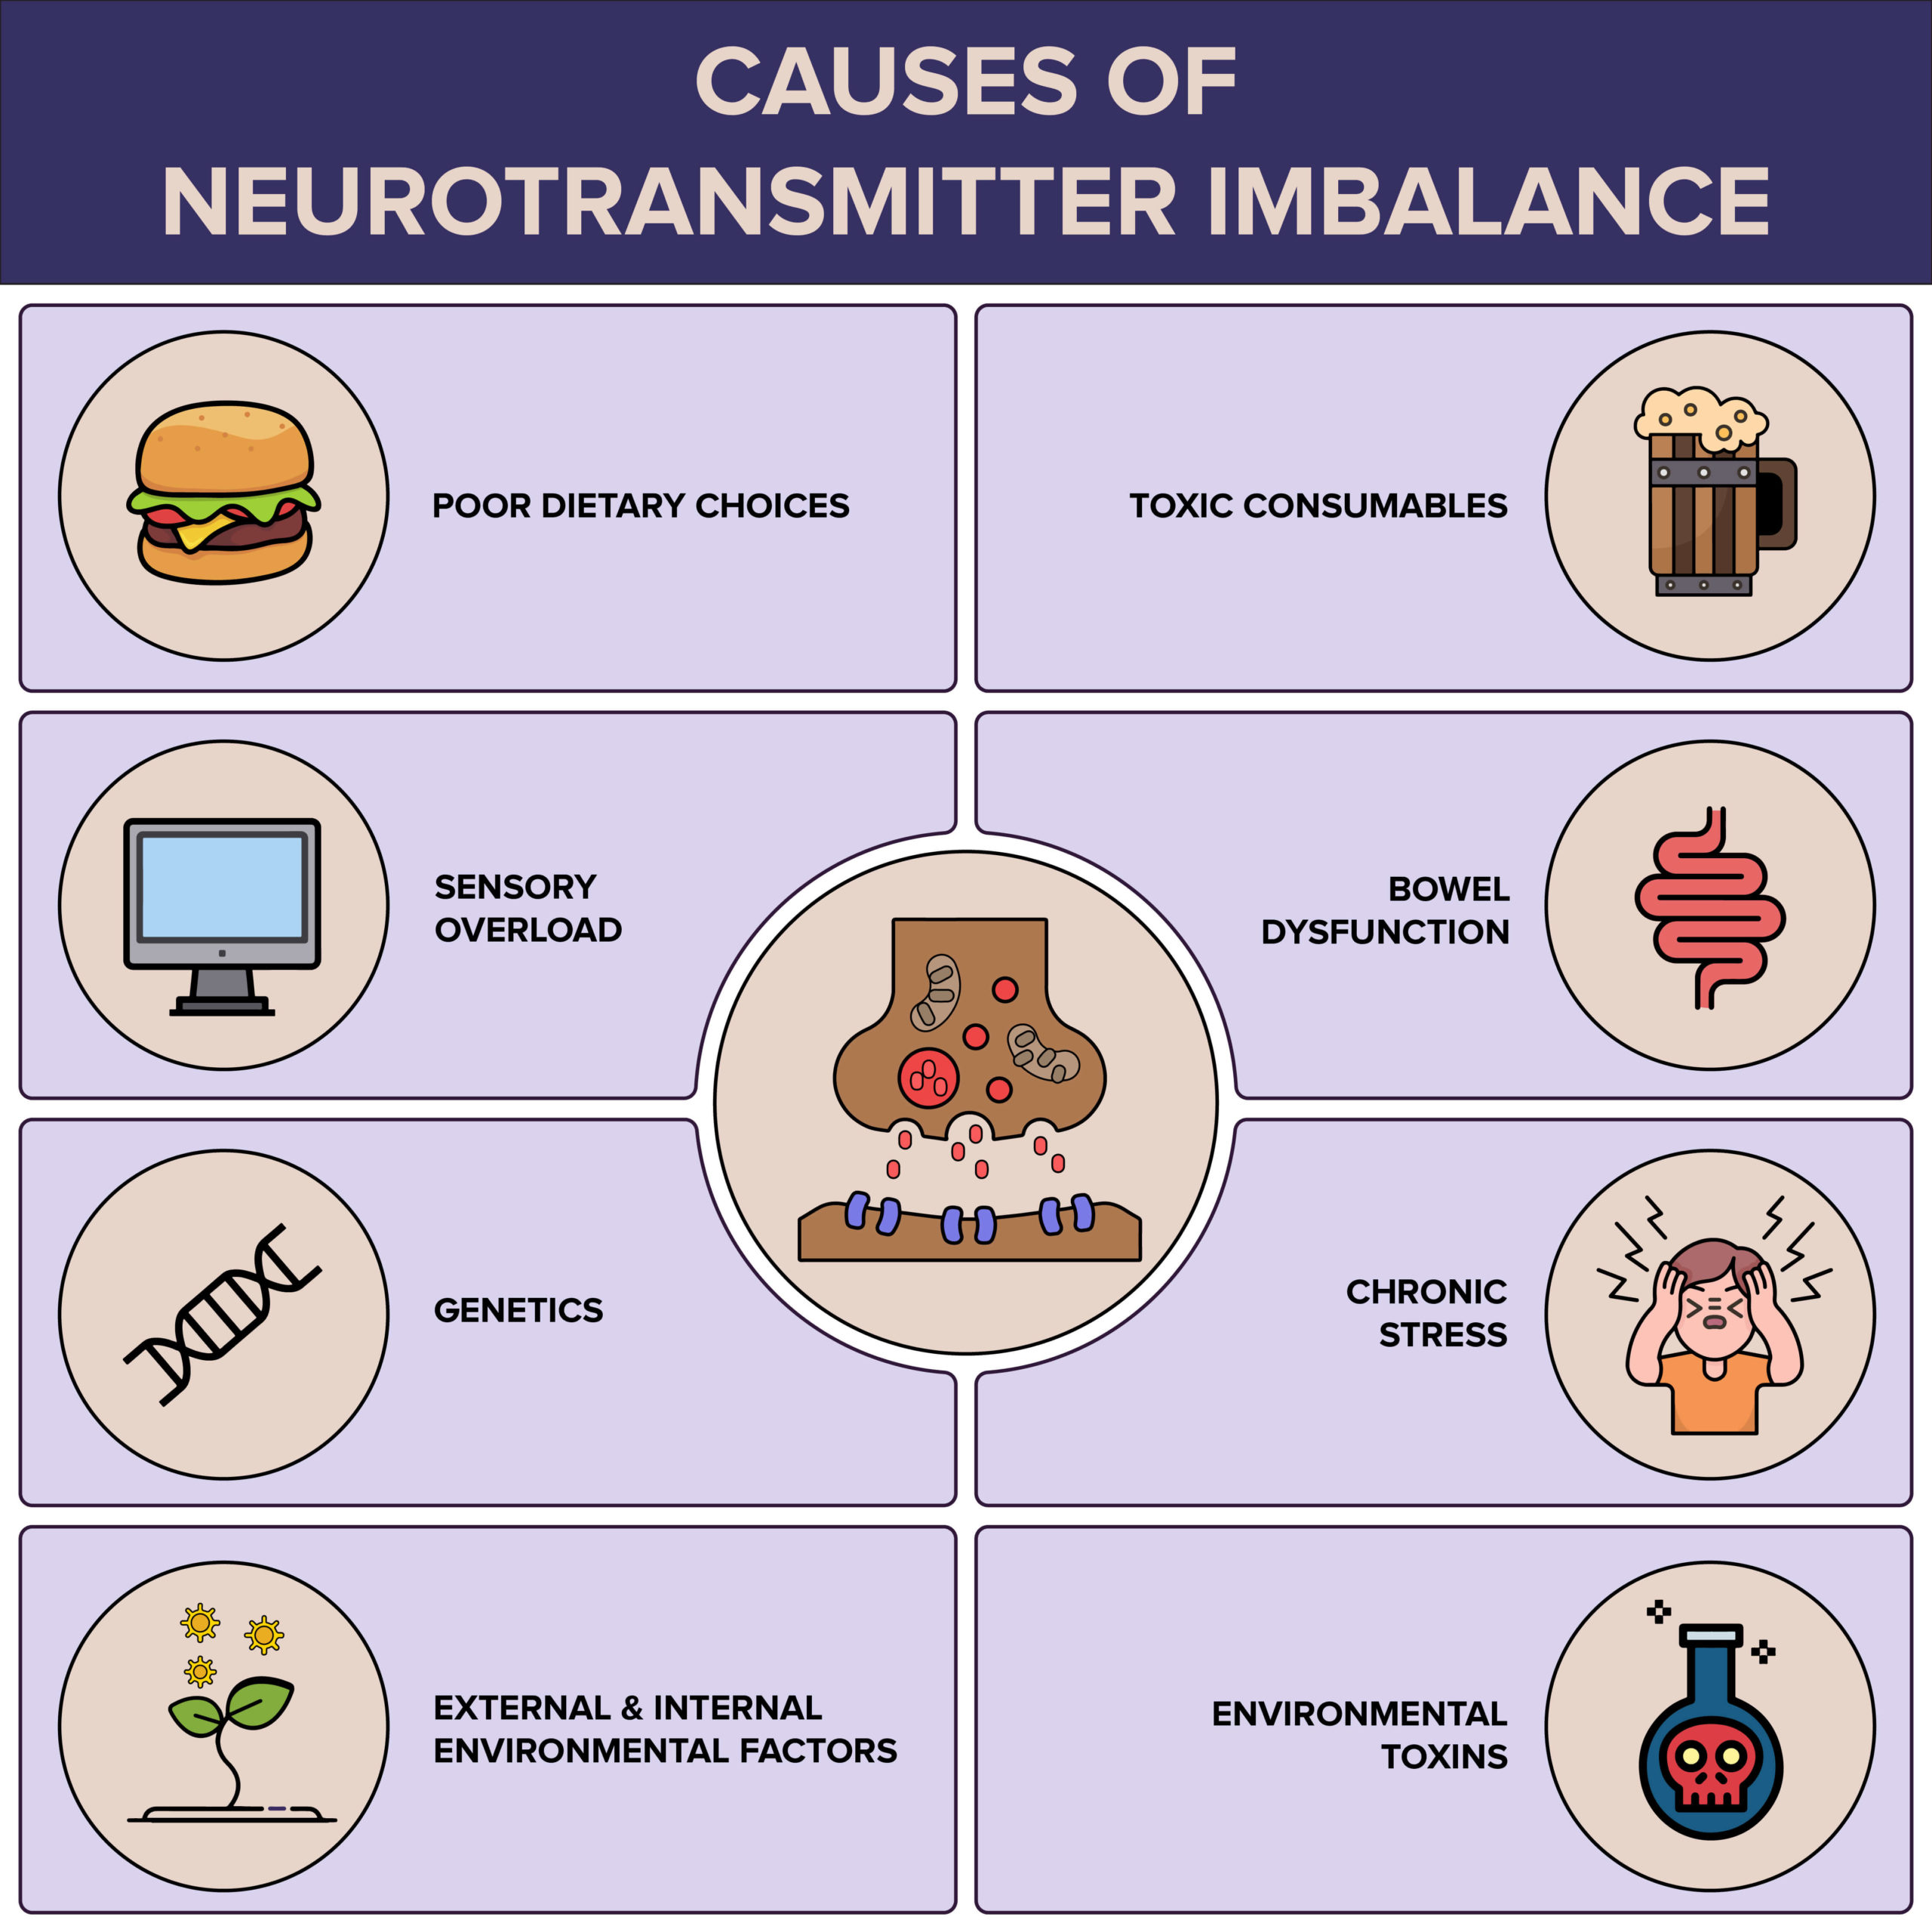 Infographic showing causes for neurotransmitter imbalance